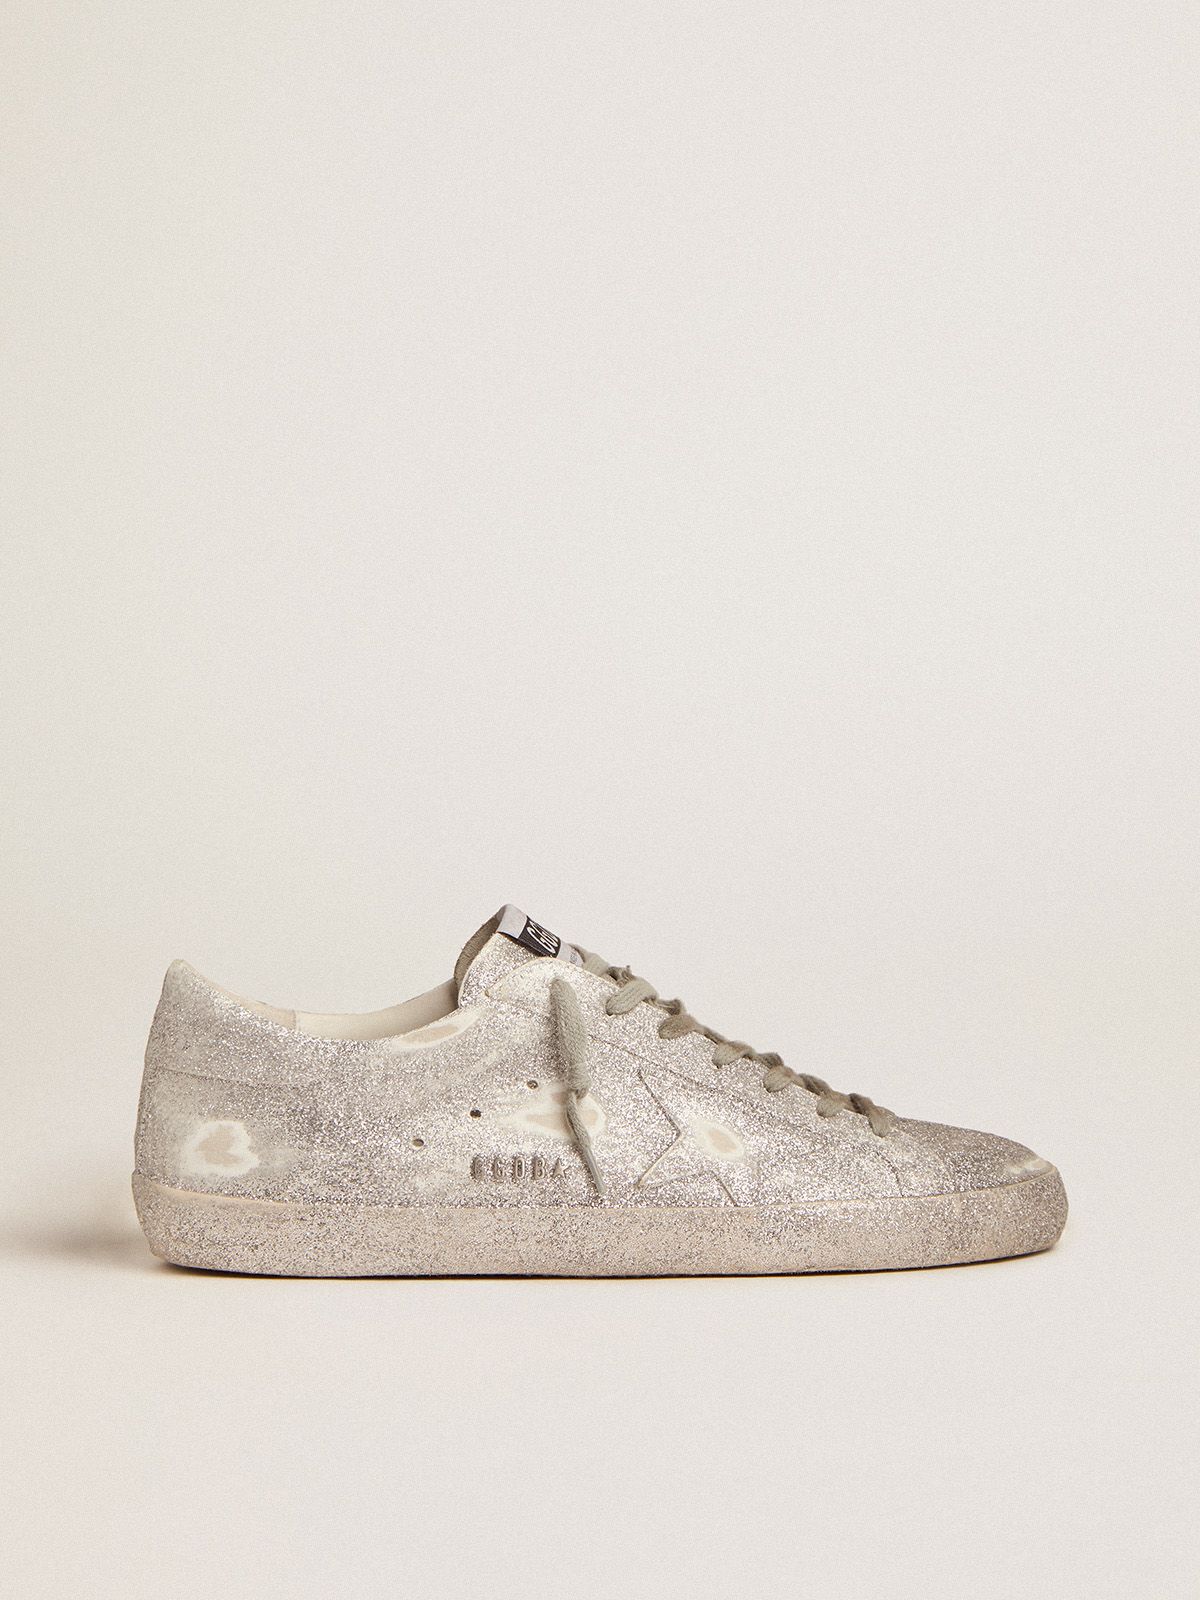 golden goose sneakers finish in leather glitter all-over with Super-Star silver